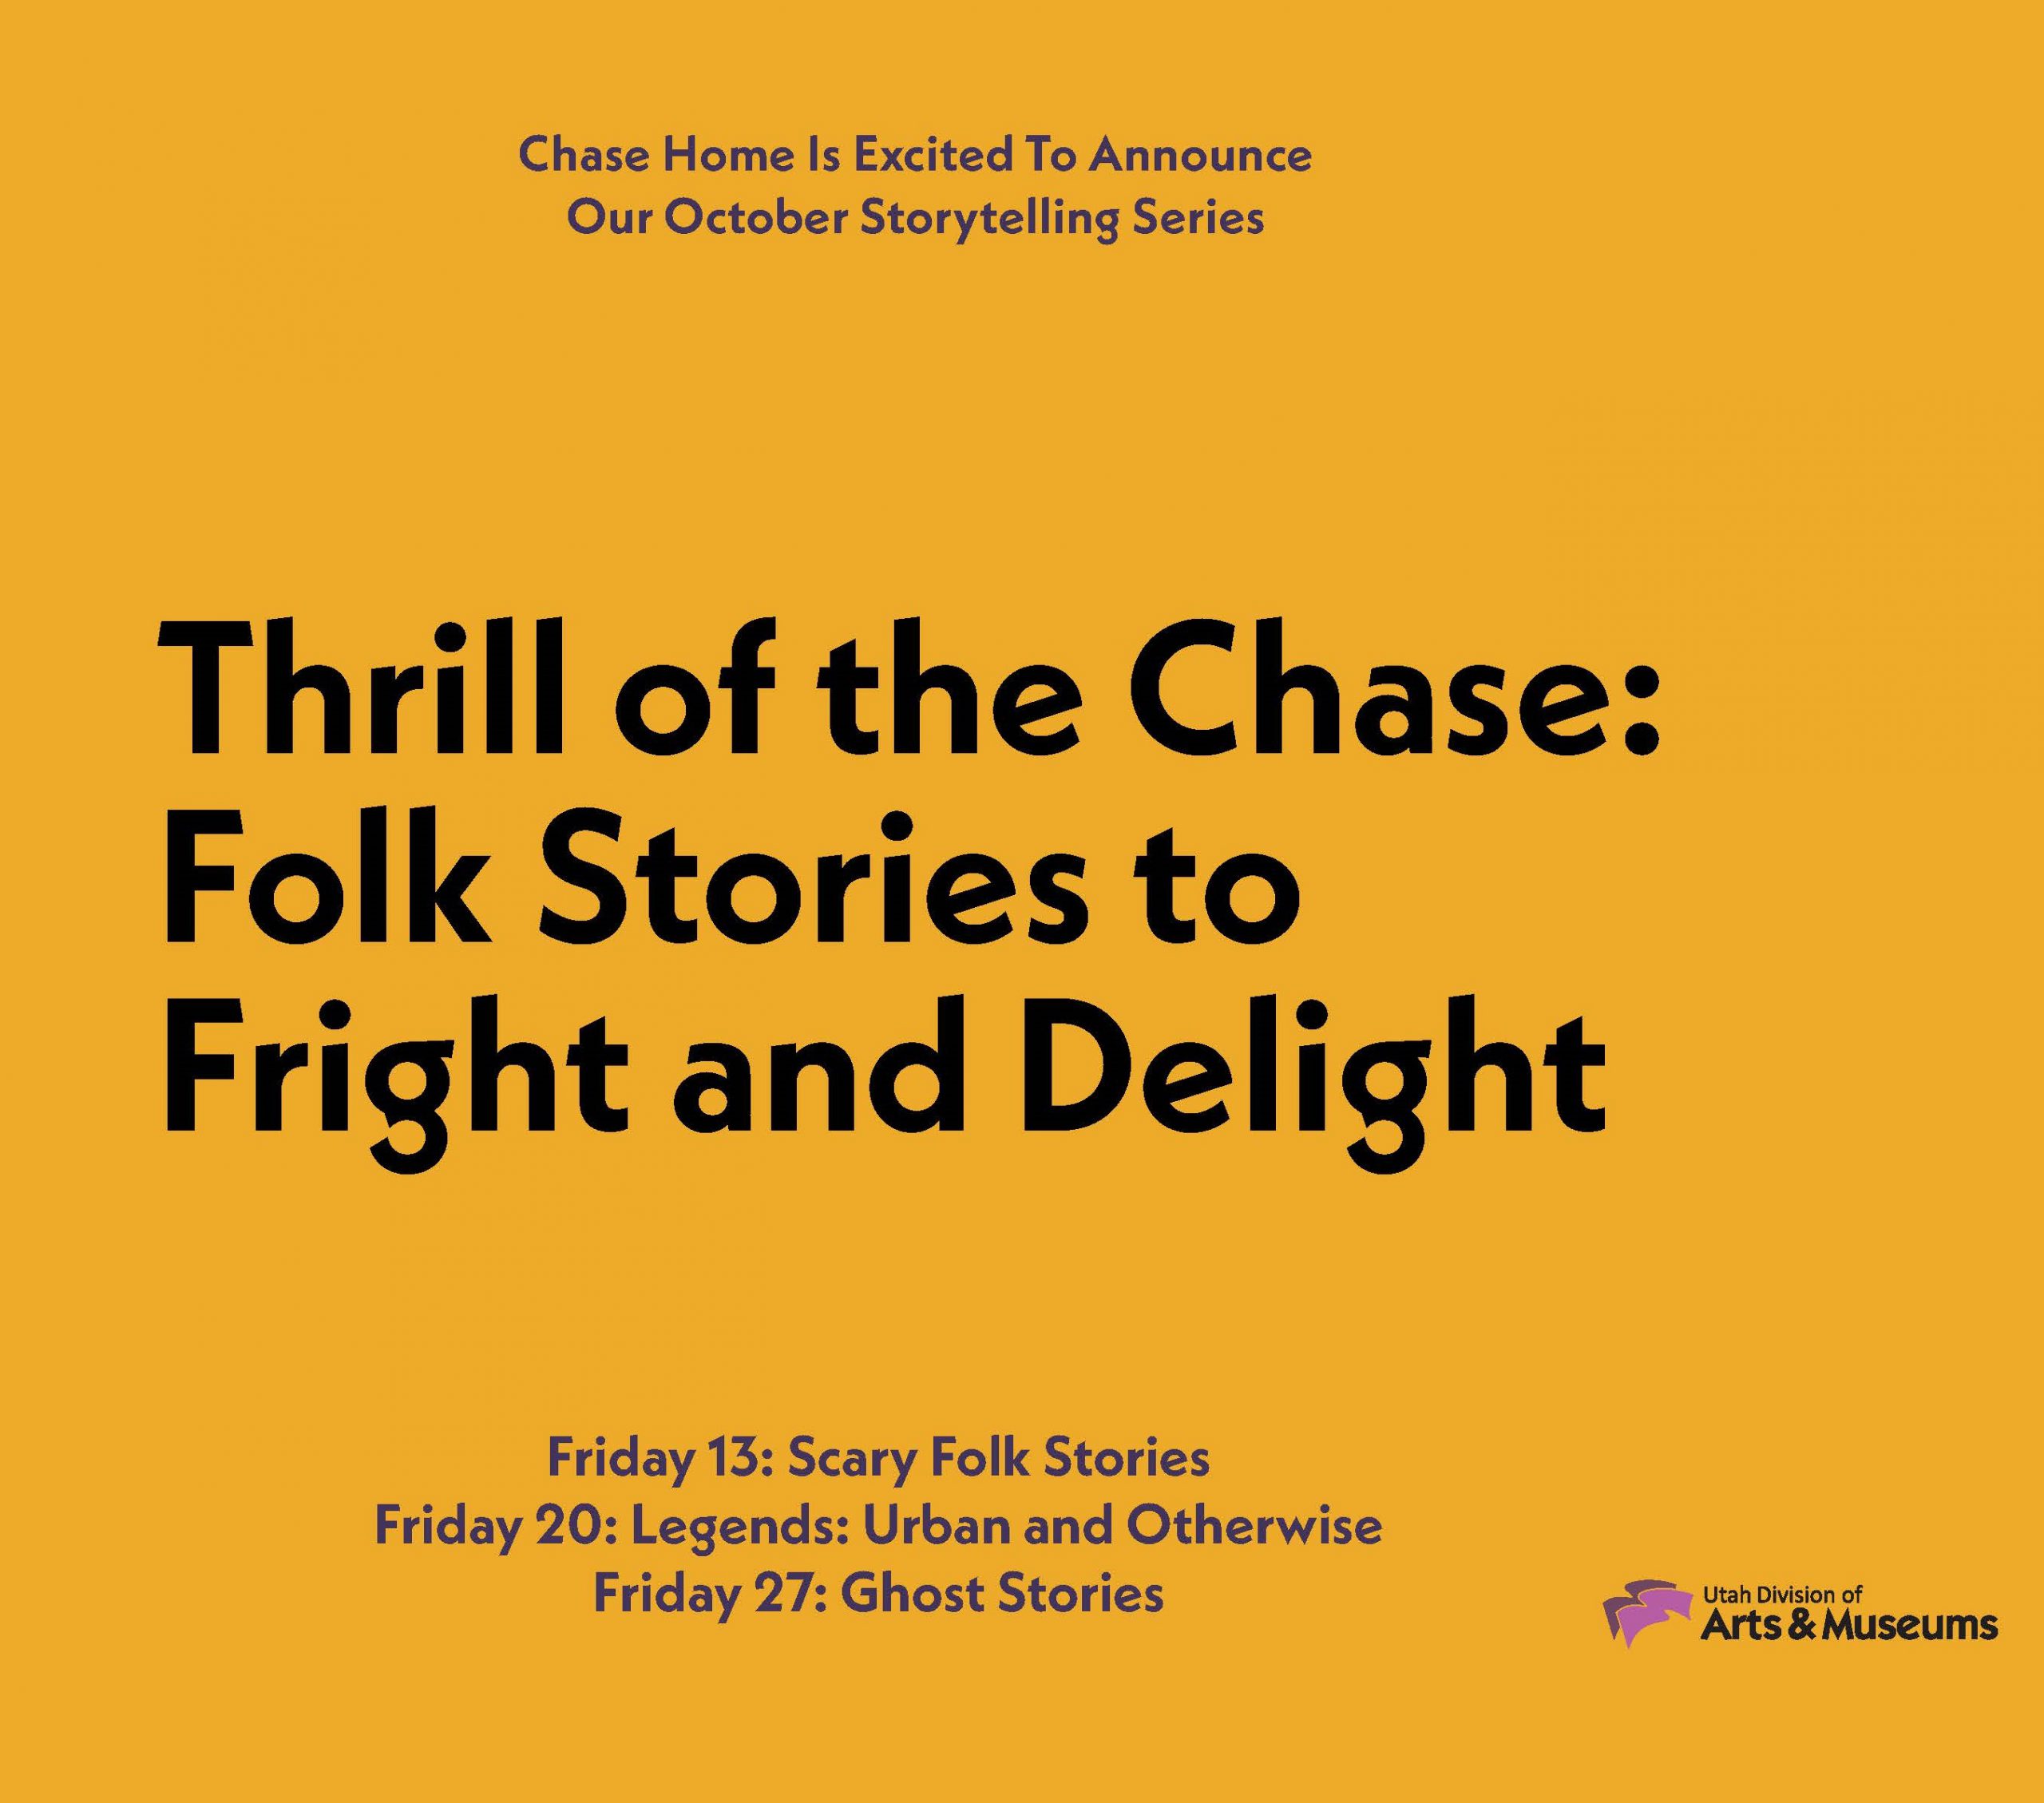 Chase Home is excited to announce our October storytelling series: Thrill of the Chase, Folk Stories to Fright and Delight.